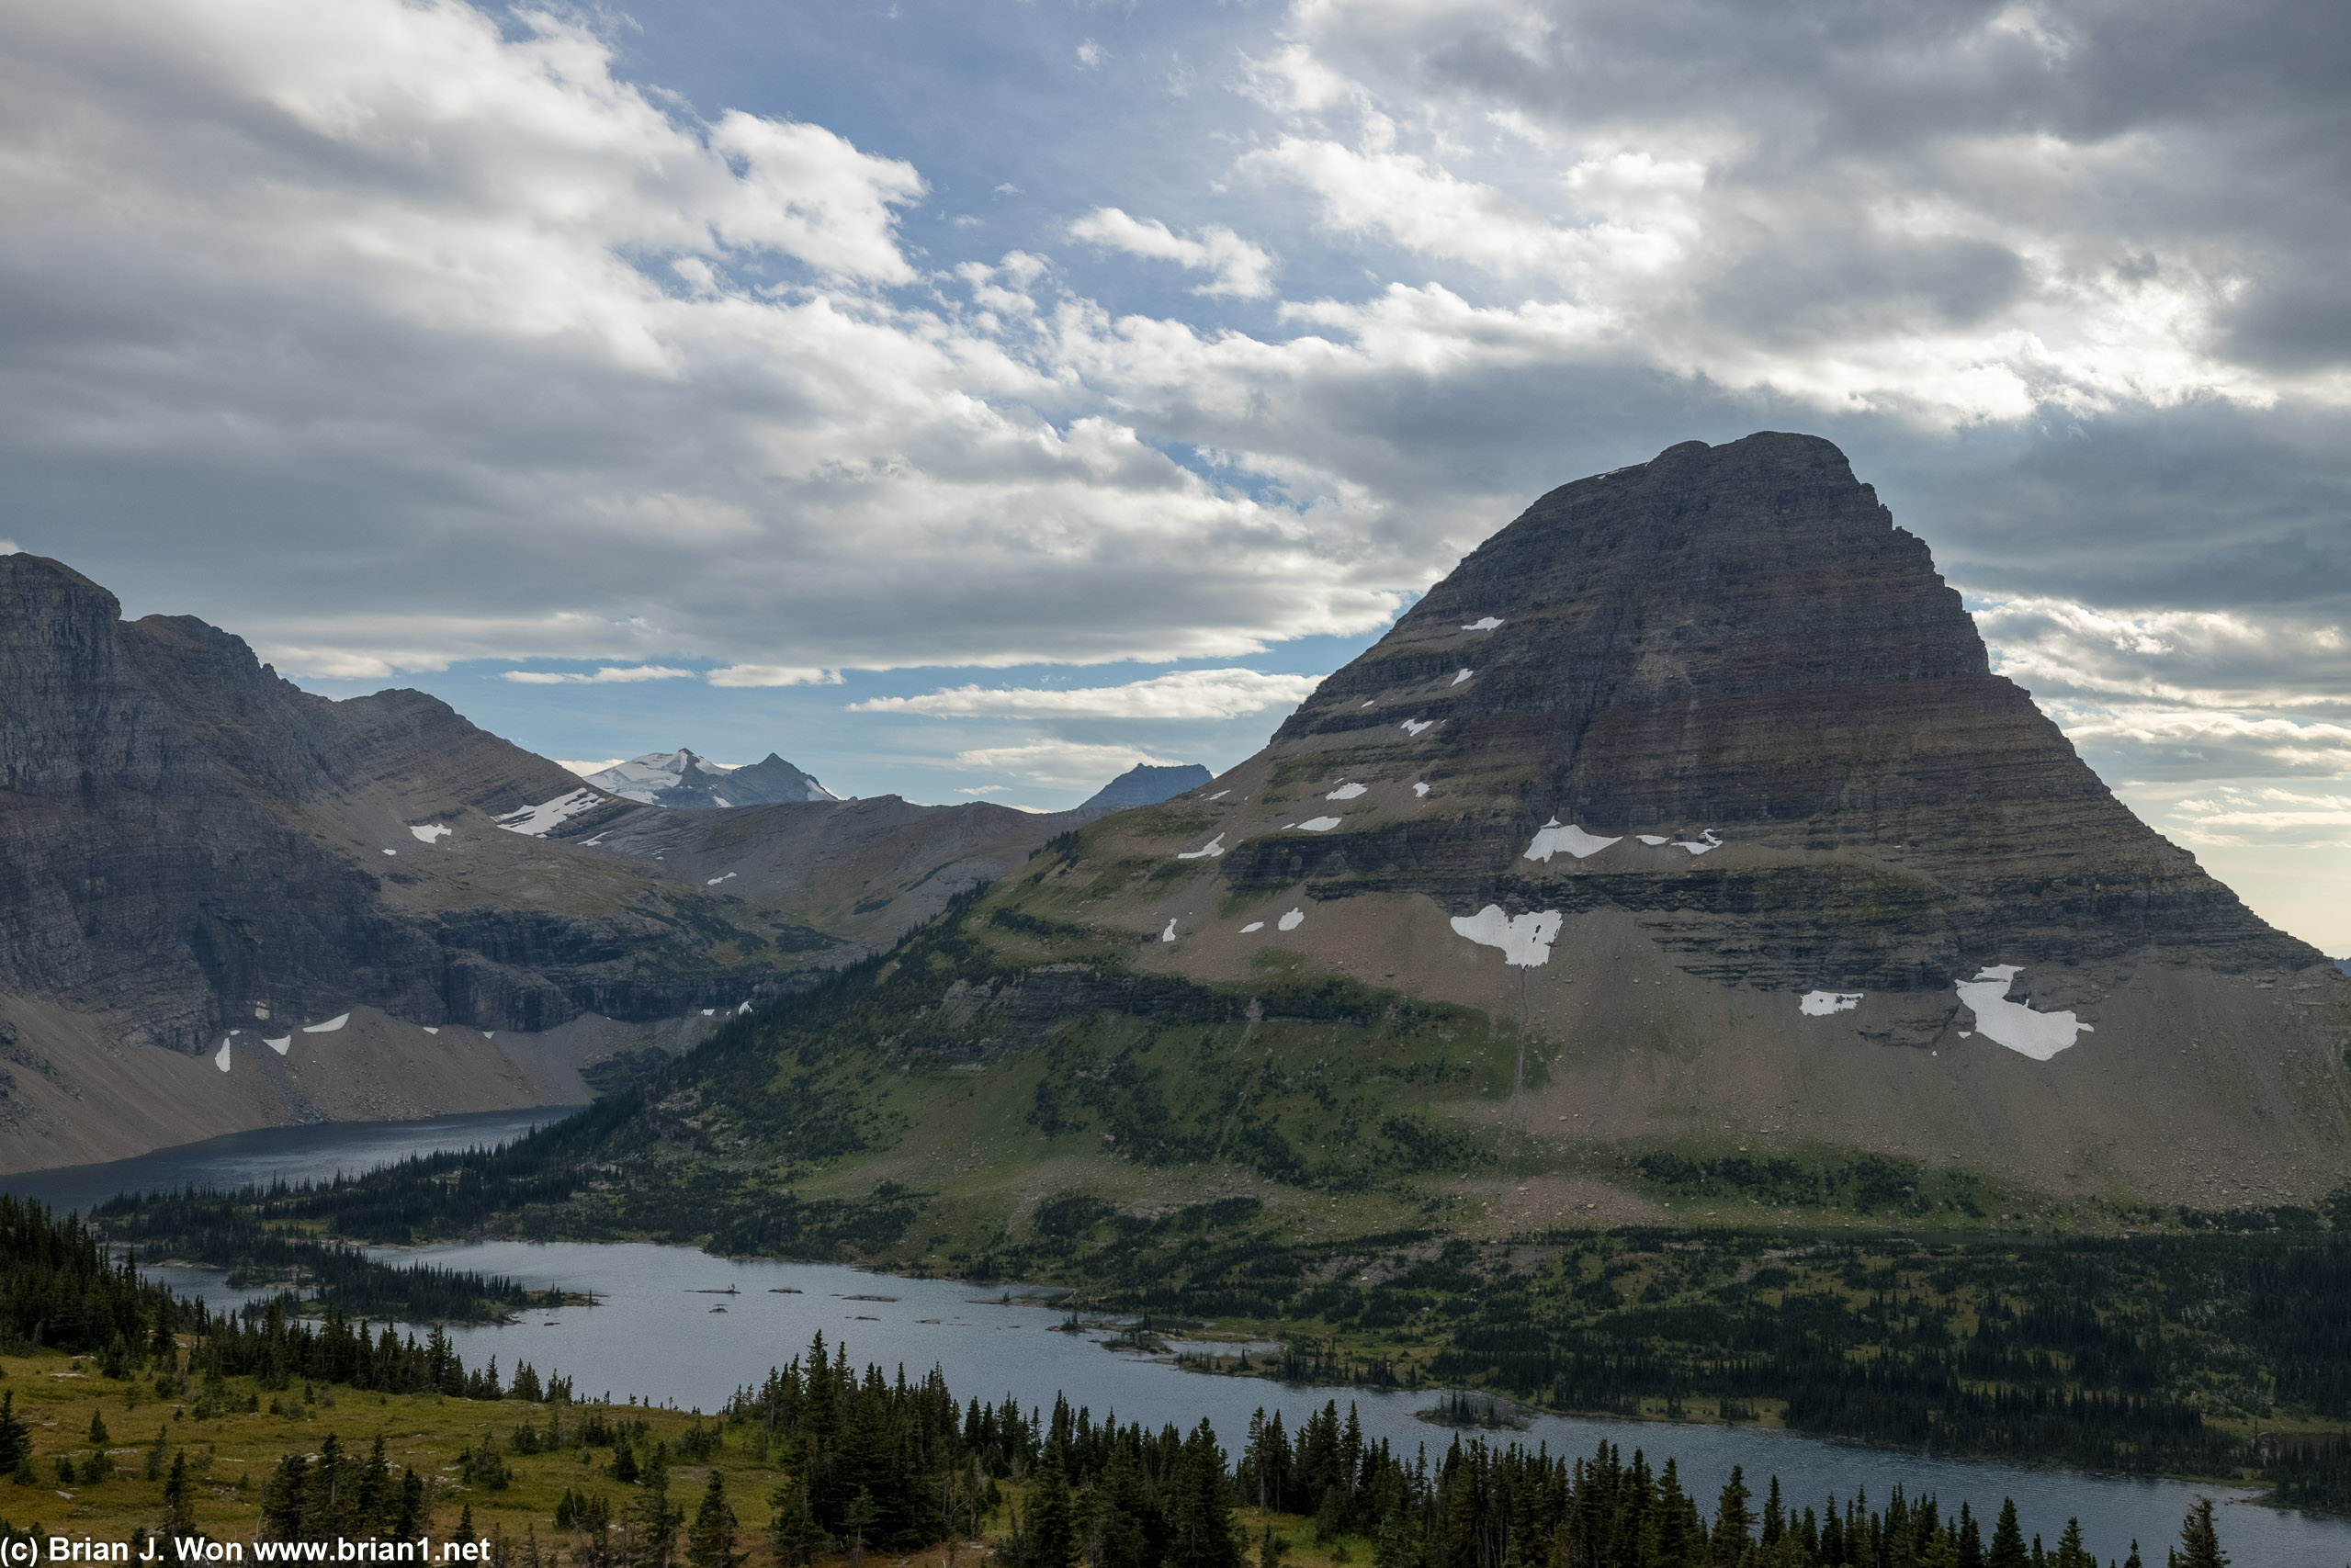 Bearhat Mountain dominates the view over Hidden Lake.